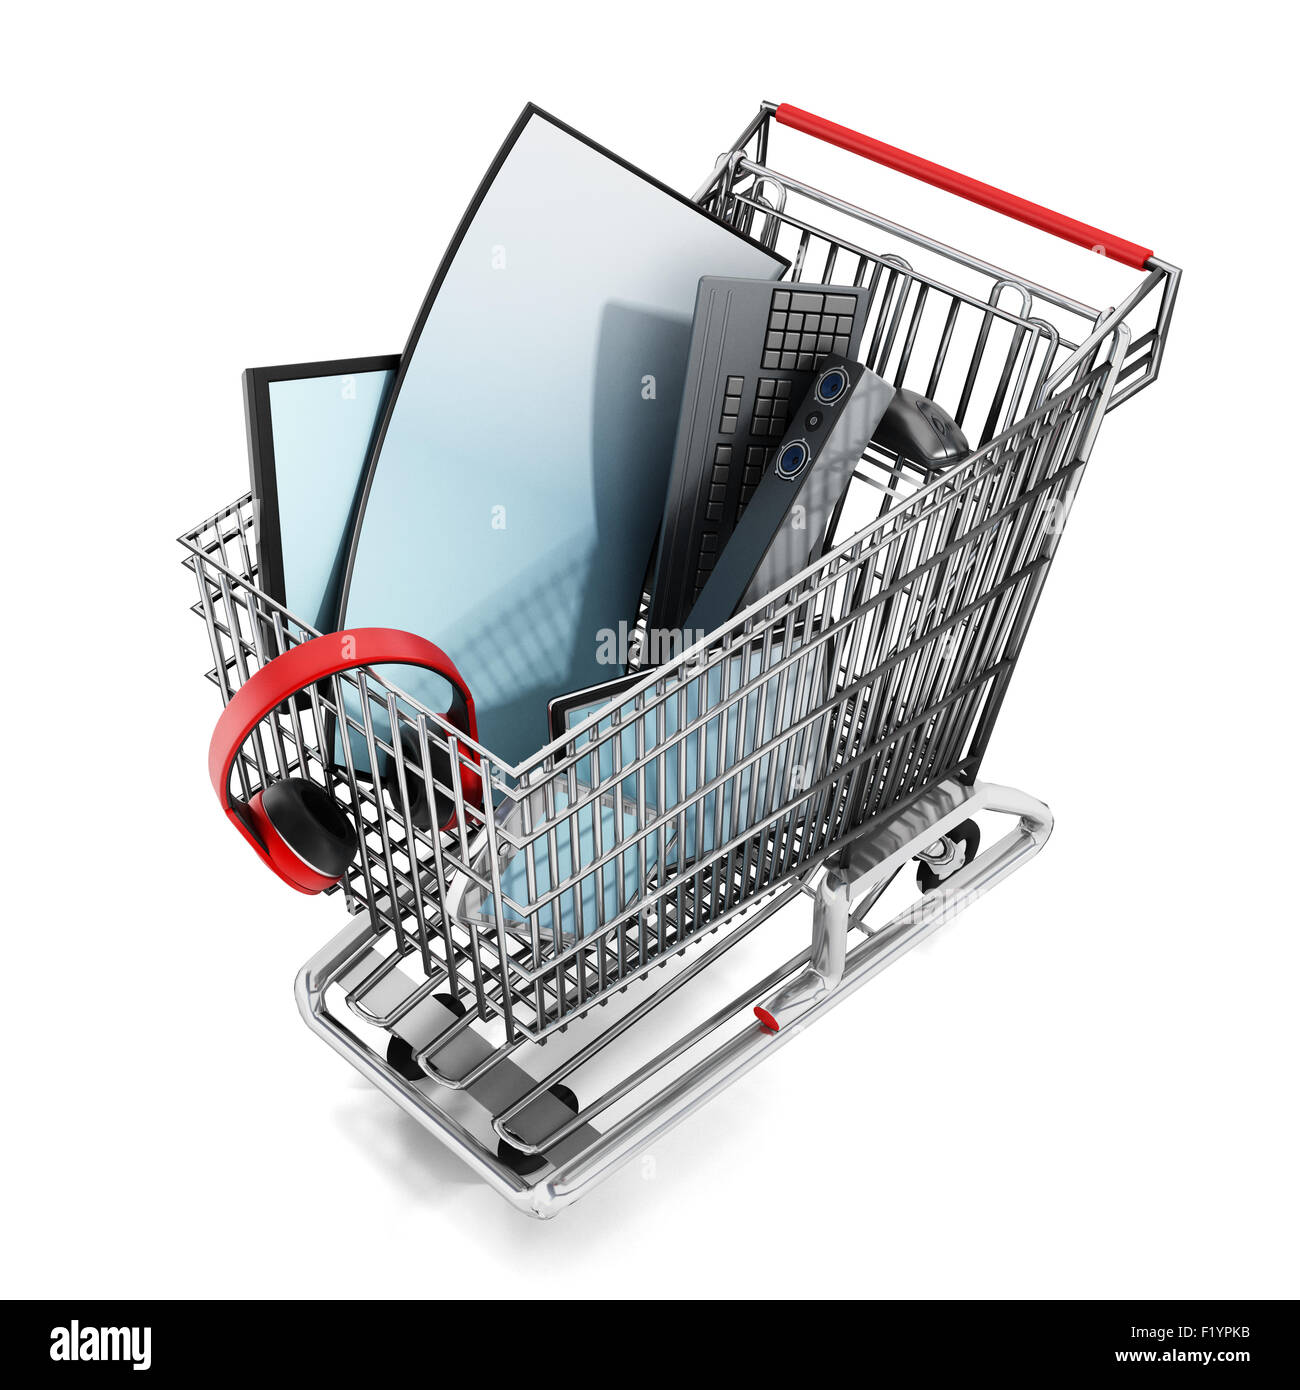 Electronic equipment inside the isolated shopping cart Stock Photo